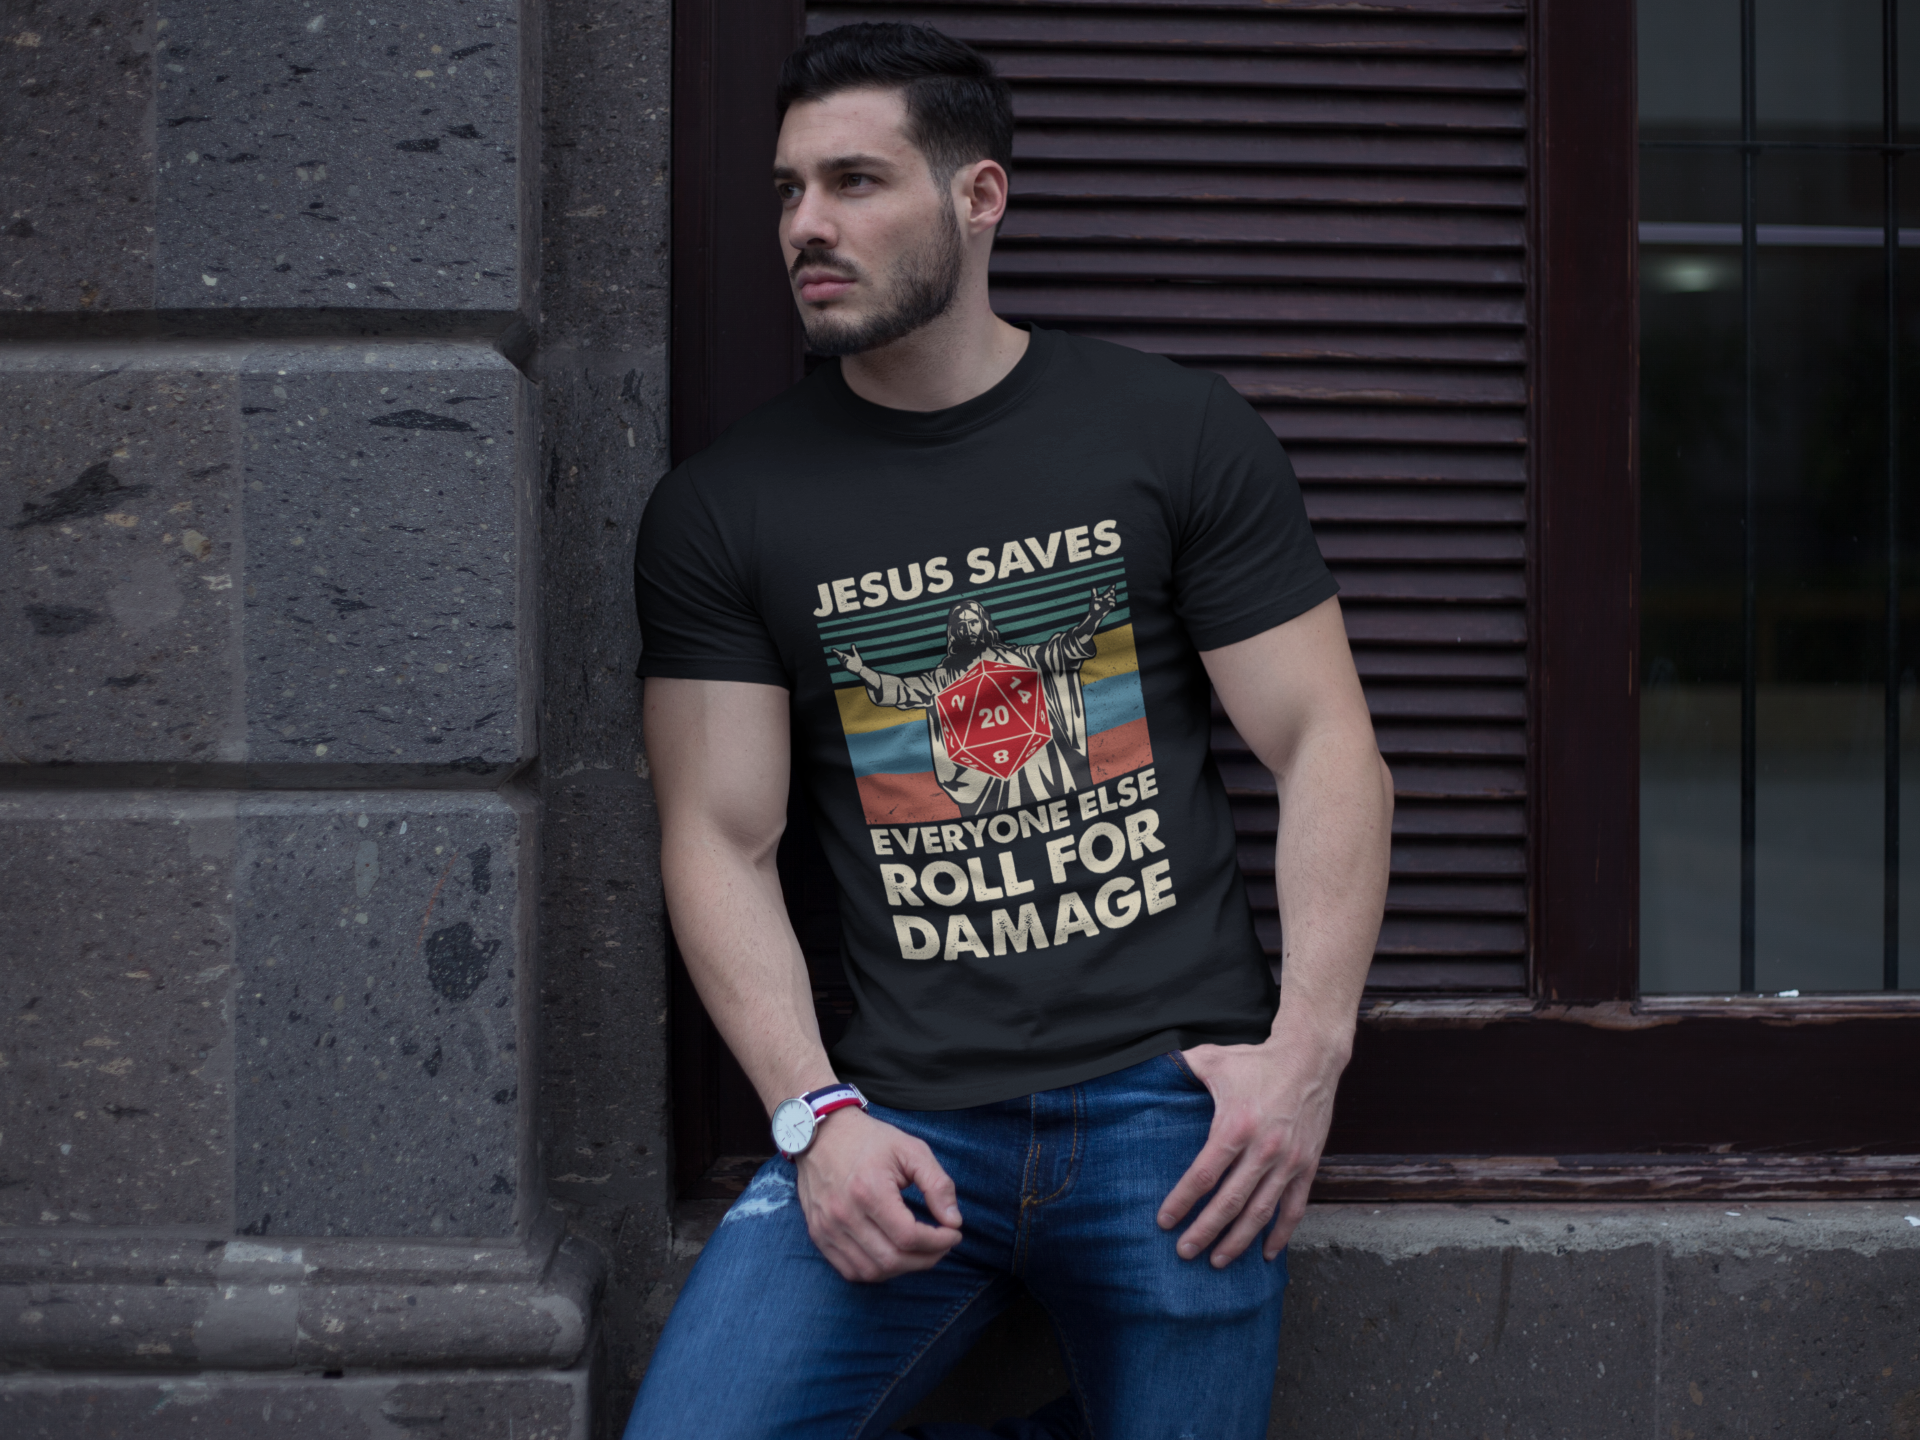 Dungeon And Dragon Vintage T Shirt, RPG Dice Games Tshirt, Jesus Saves Everyone Else Roll For Damage DND T Shirt, Christian Gifts